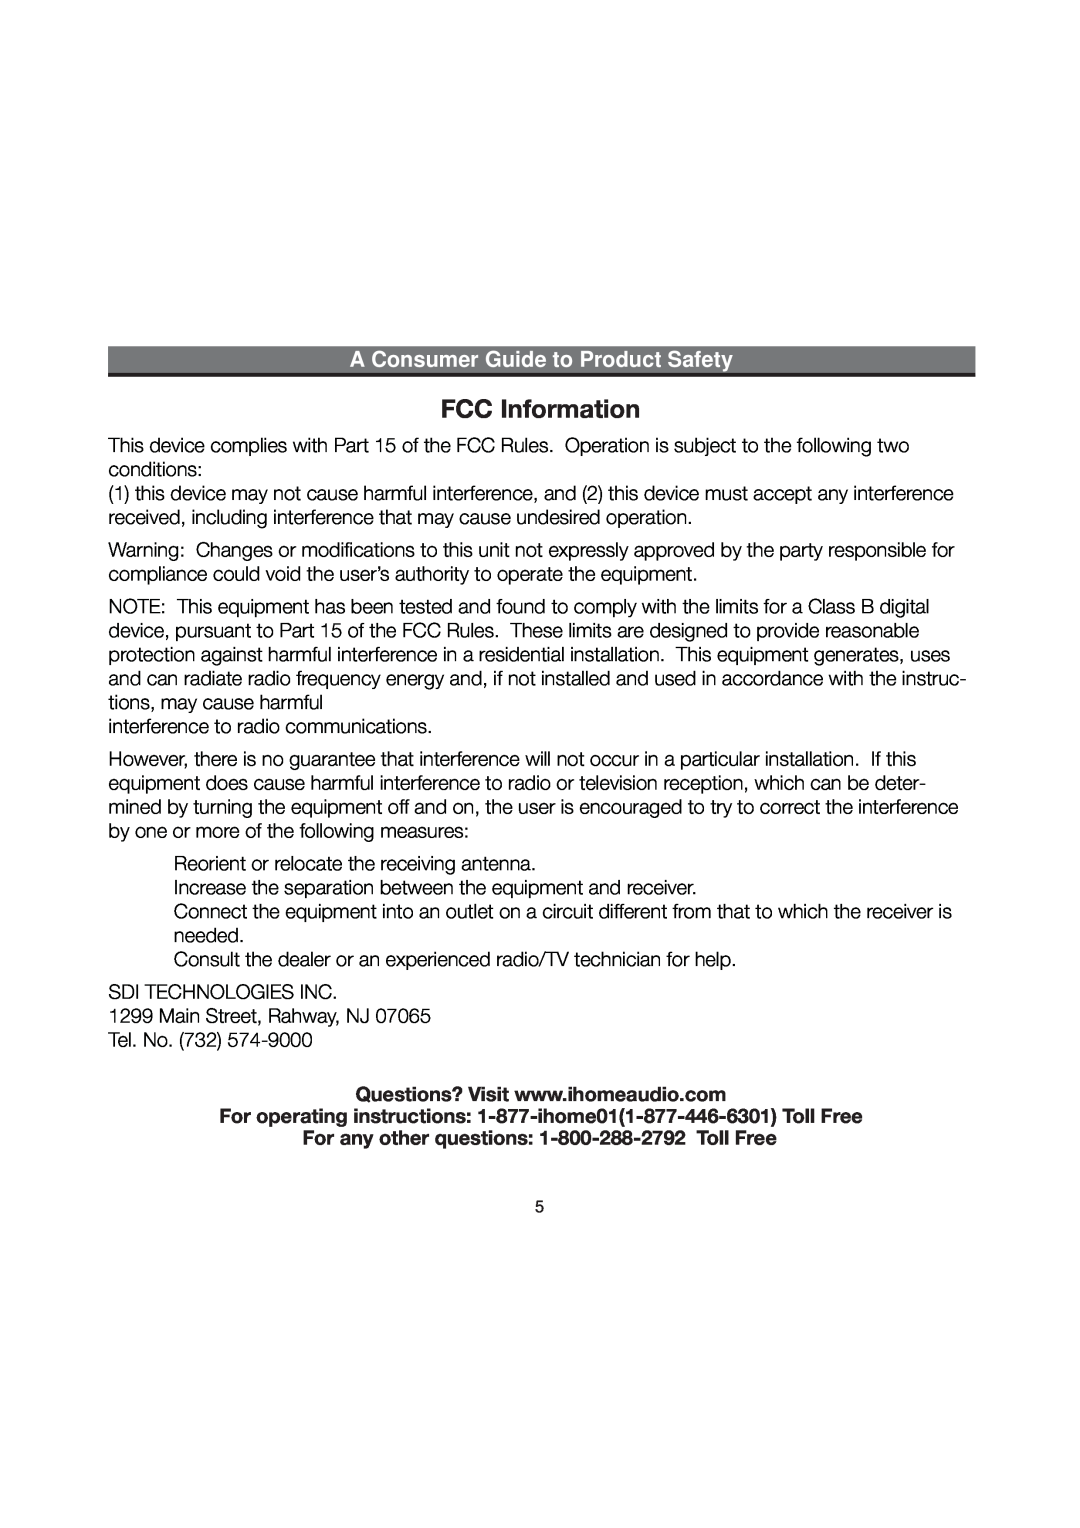 iHome IH52 manual FCC Information, A Consumer Guide to Product Safety, For any other questions 1-800-288-2792 Toll Free 